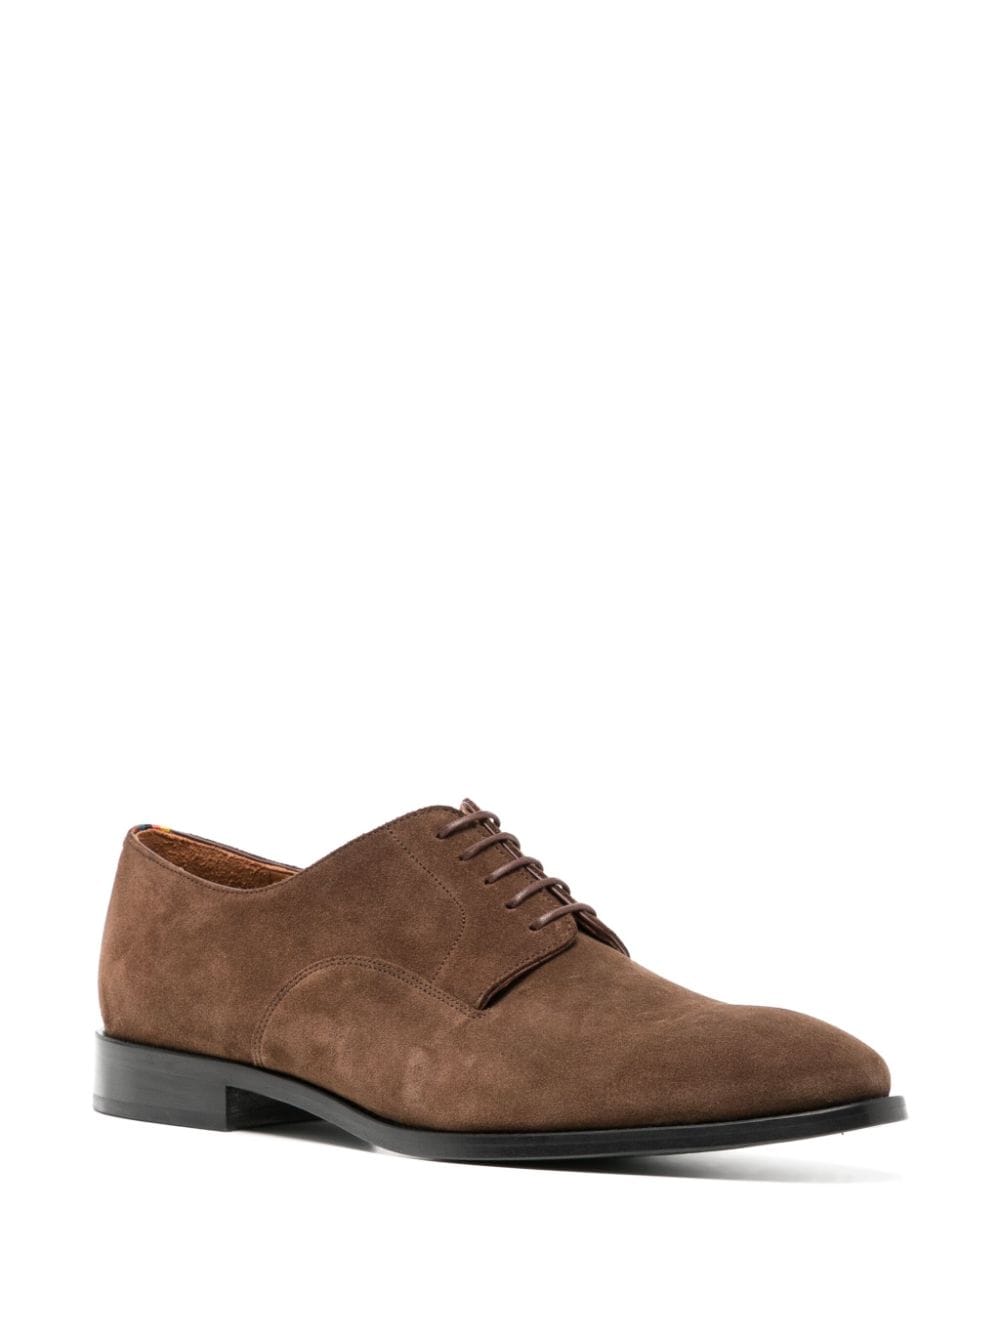 Paul Smith almond-toe suede derby shoes - Bruin